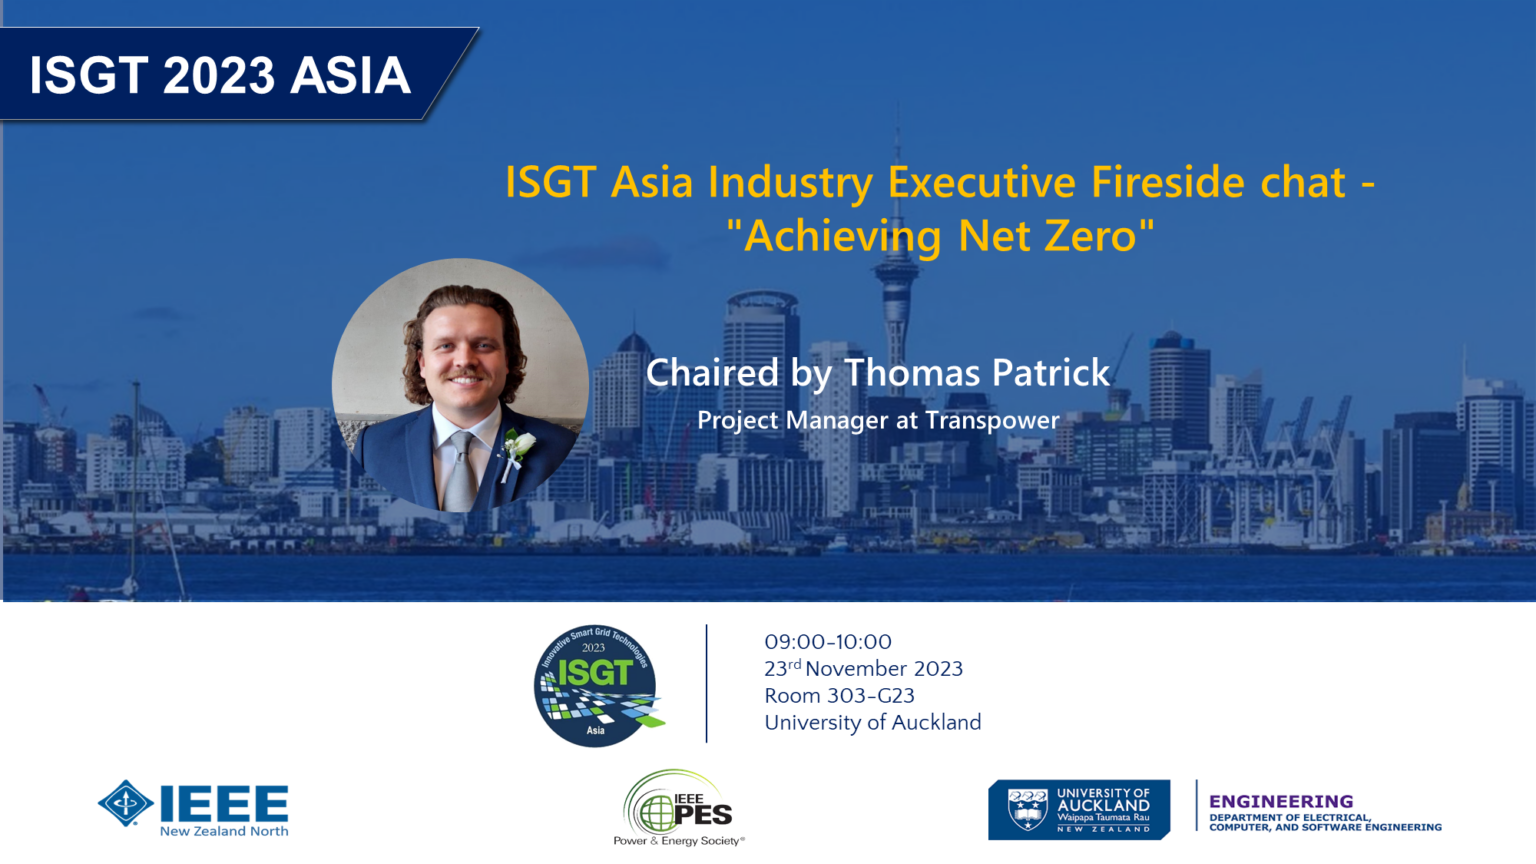 Thursday, 23 November IEEE PES ISGT Asia 2023